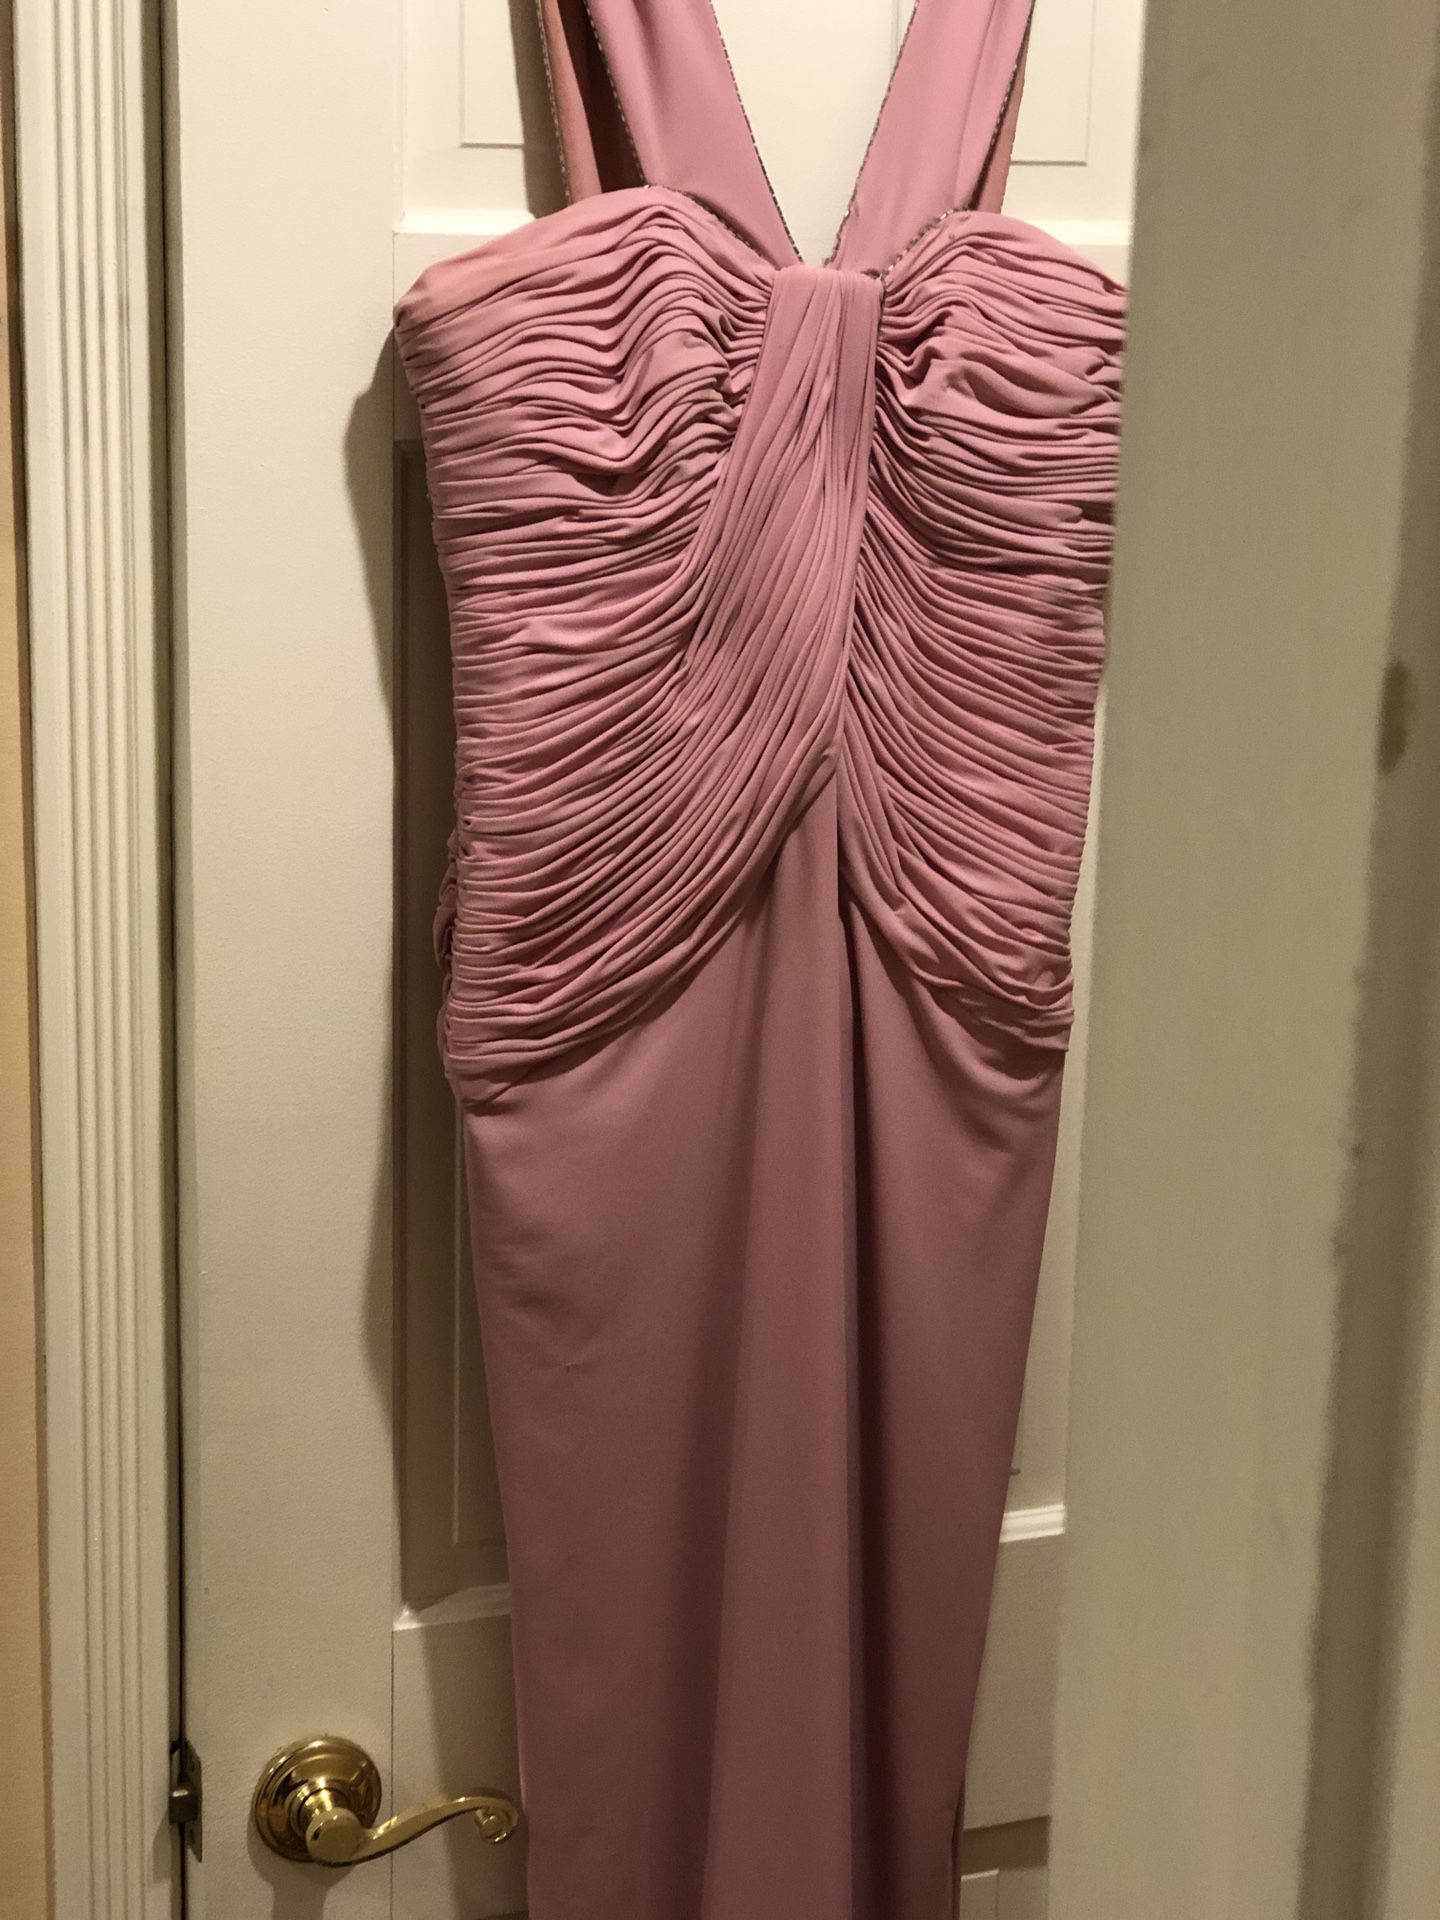 A Beautiful Long Dress For Your Prom Or Any Special Occasion Very Fitting And Slimming Size 10 Beautiful Color